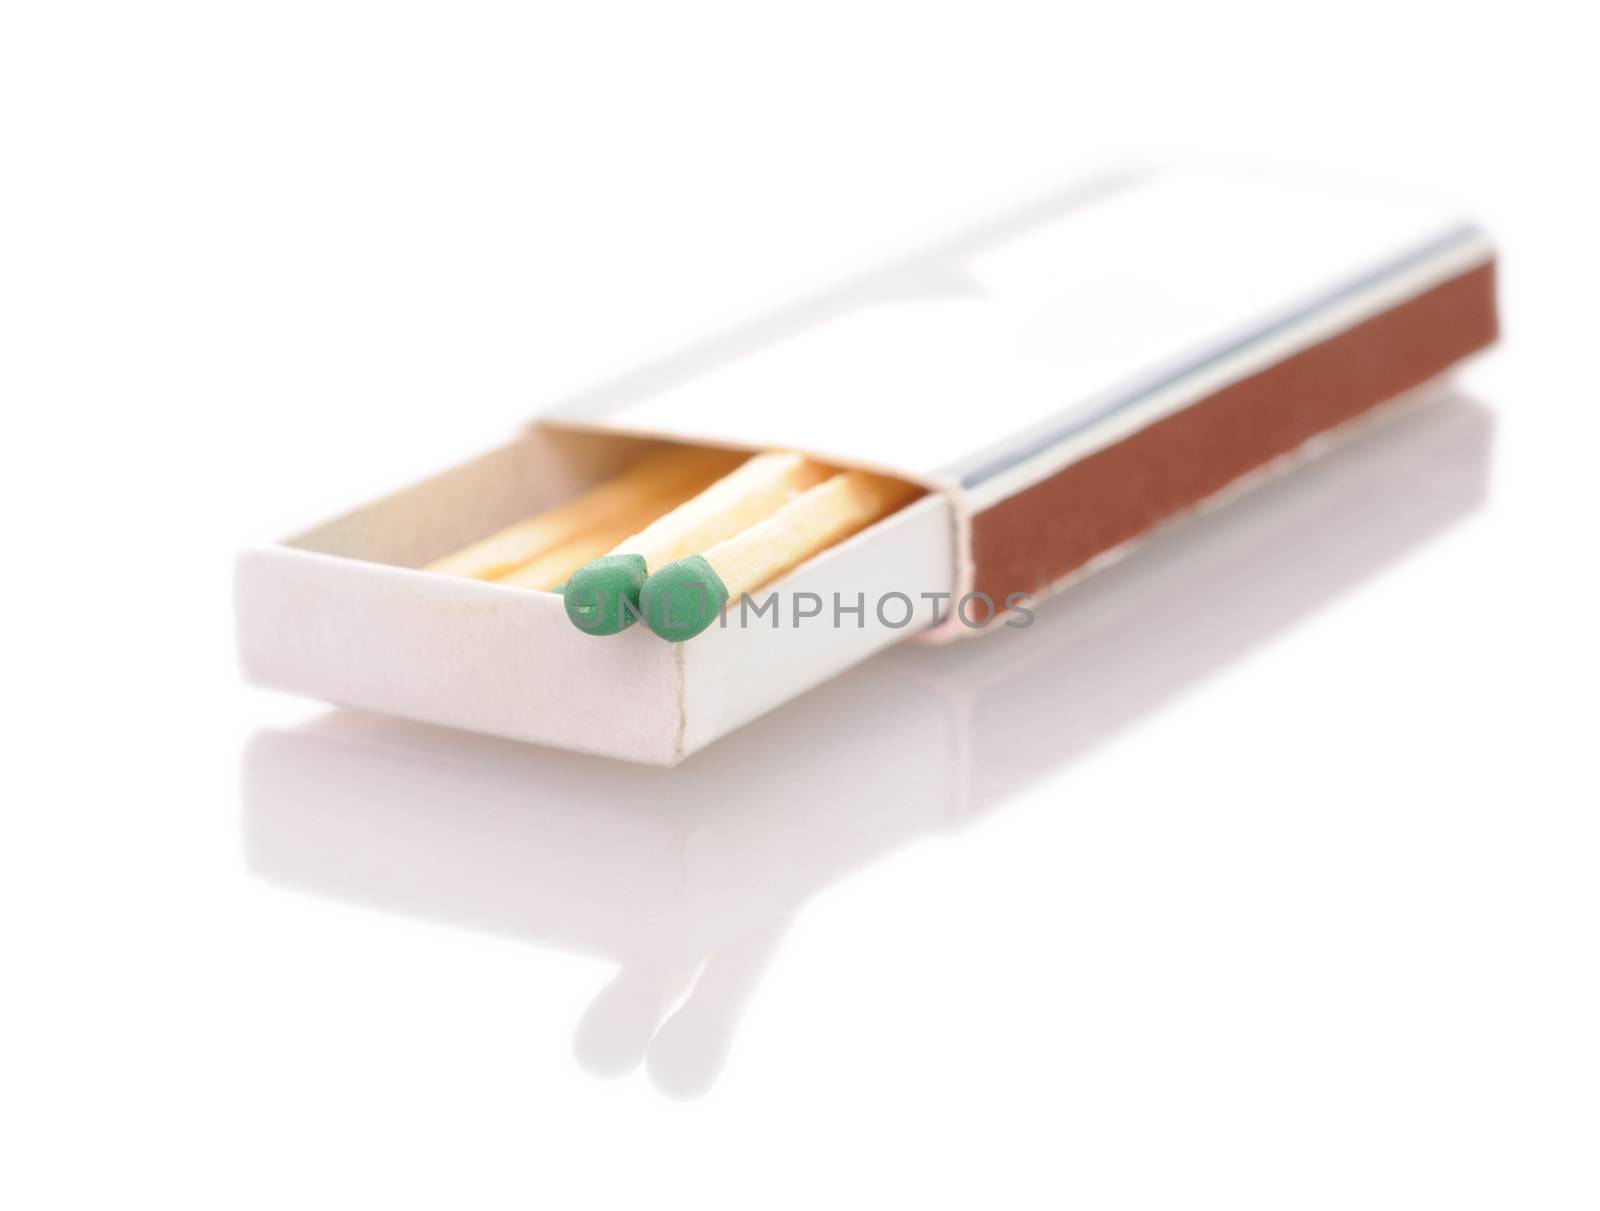 Matchbox with stylish black matches with white heads. Close-up with focus on the match head. Isolated on white background.